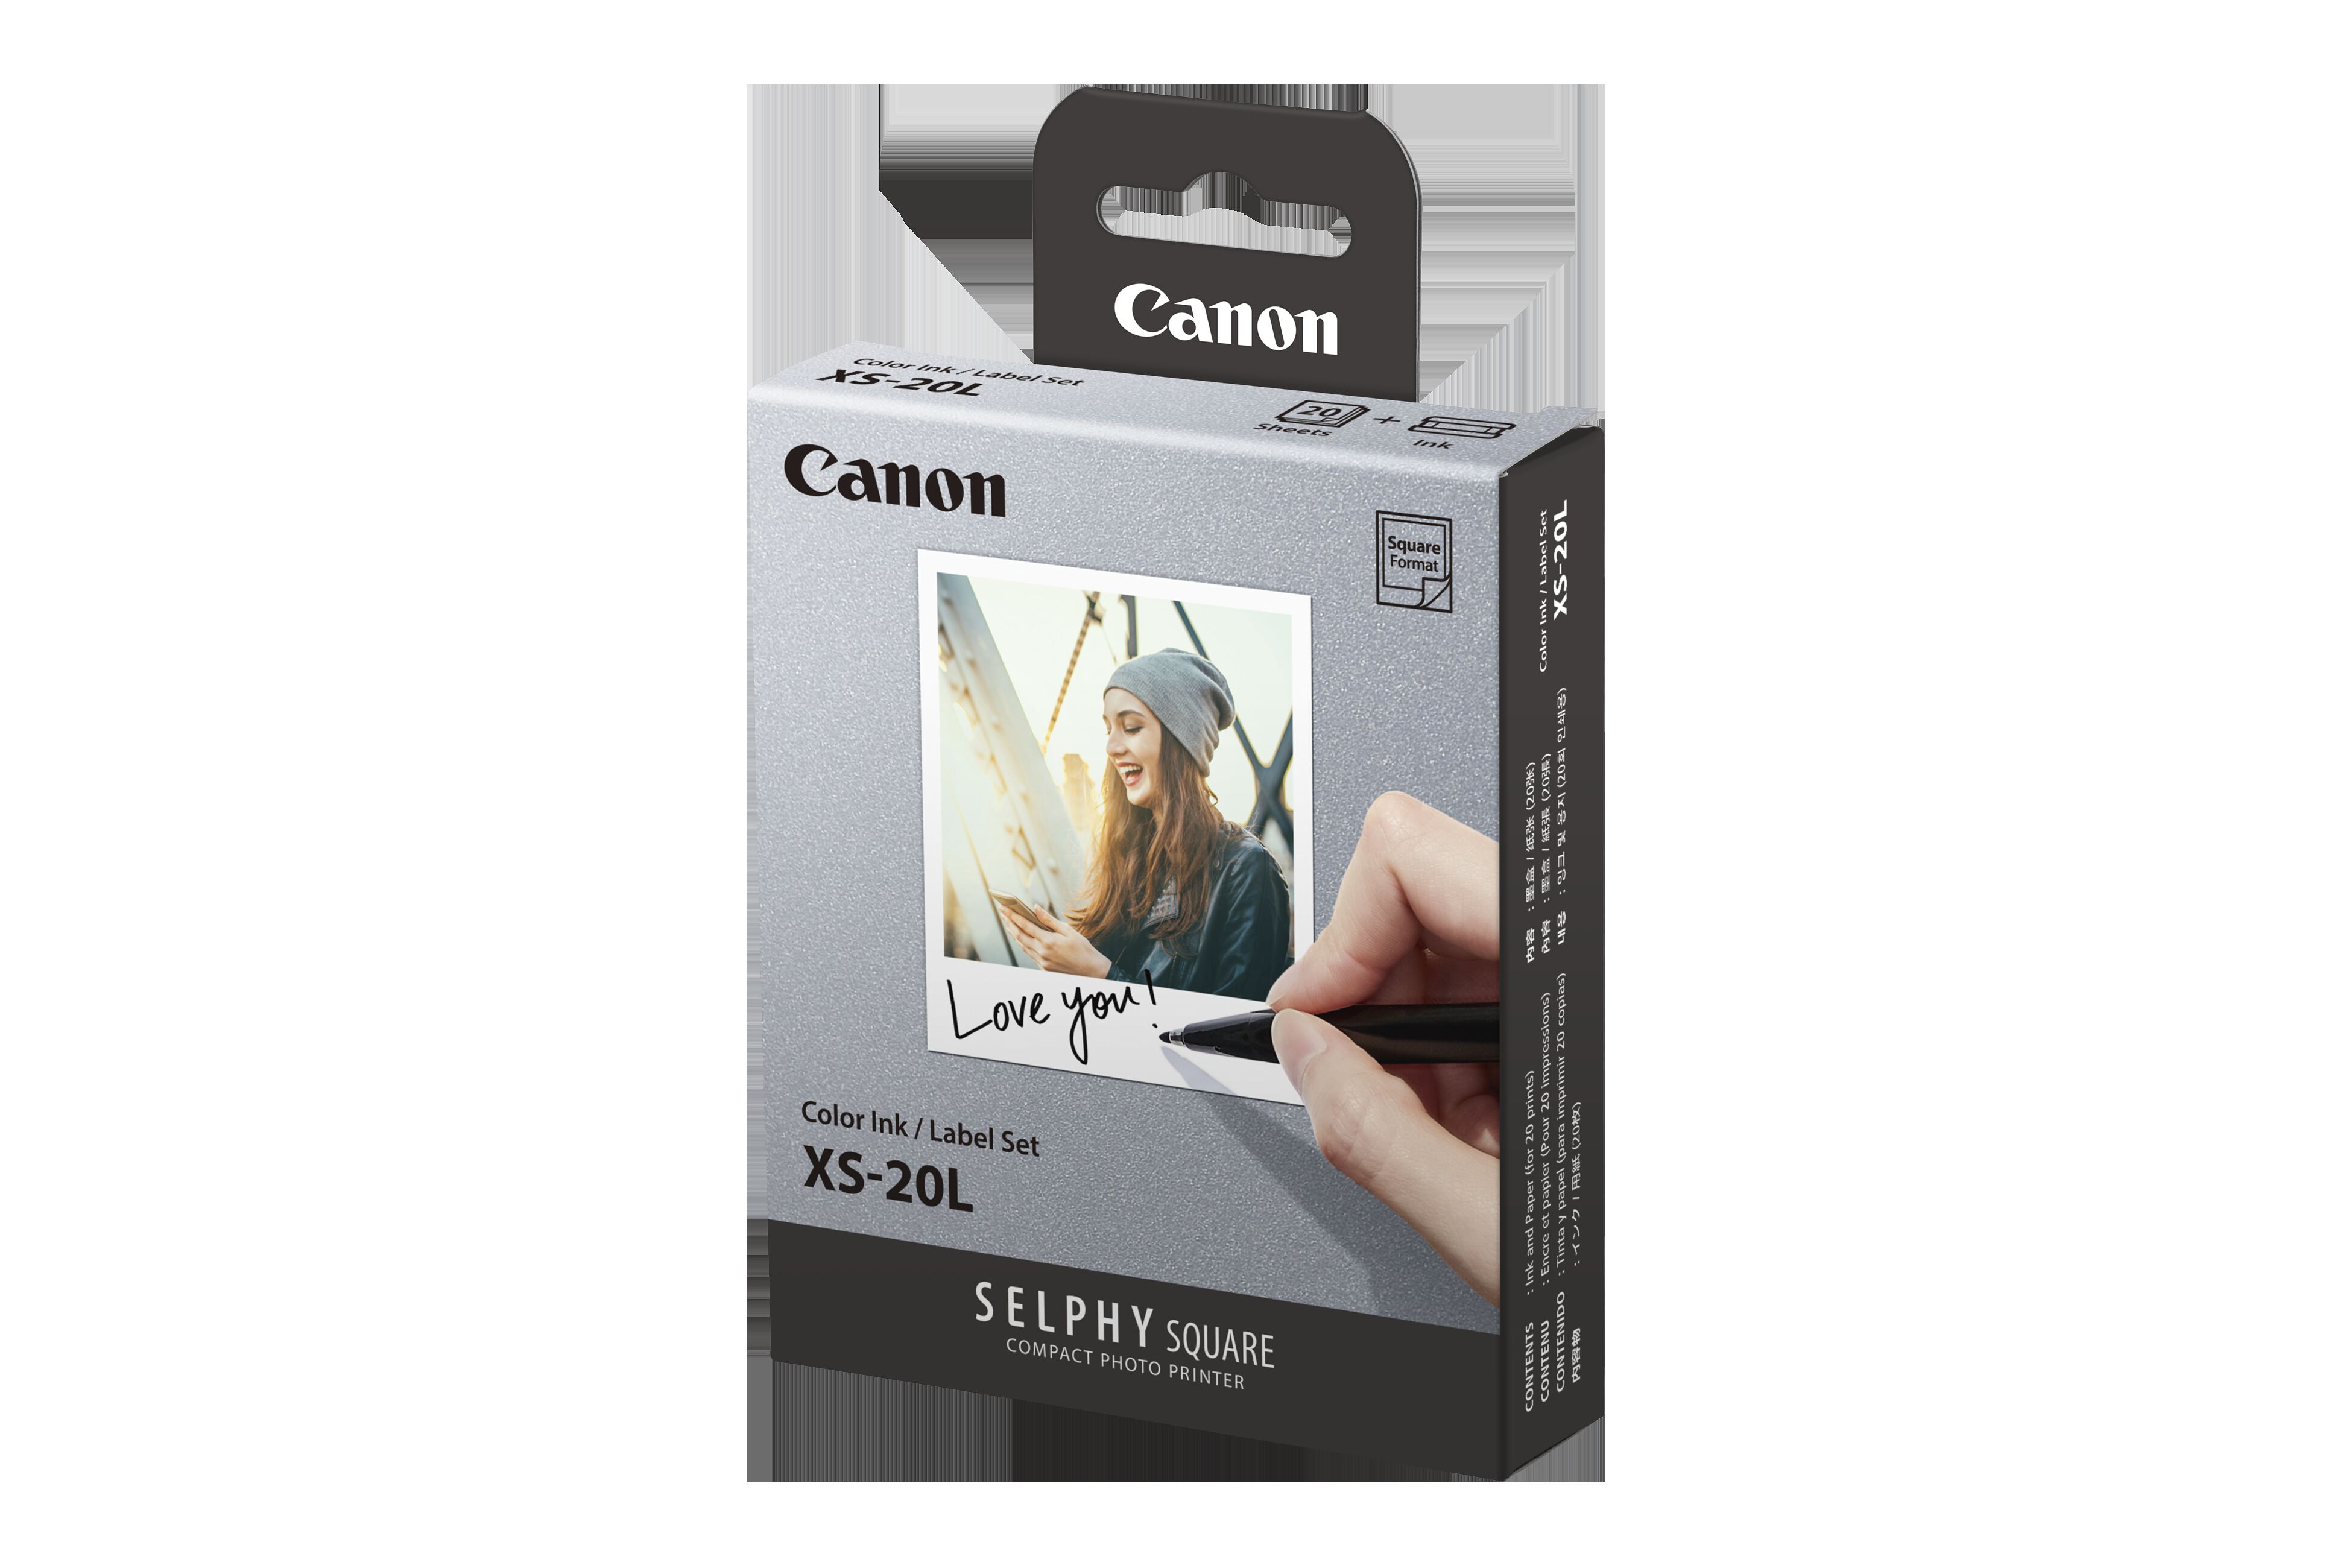 Canon SELPHY Color Ink & Label XS-20L Set (20 Sheets)